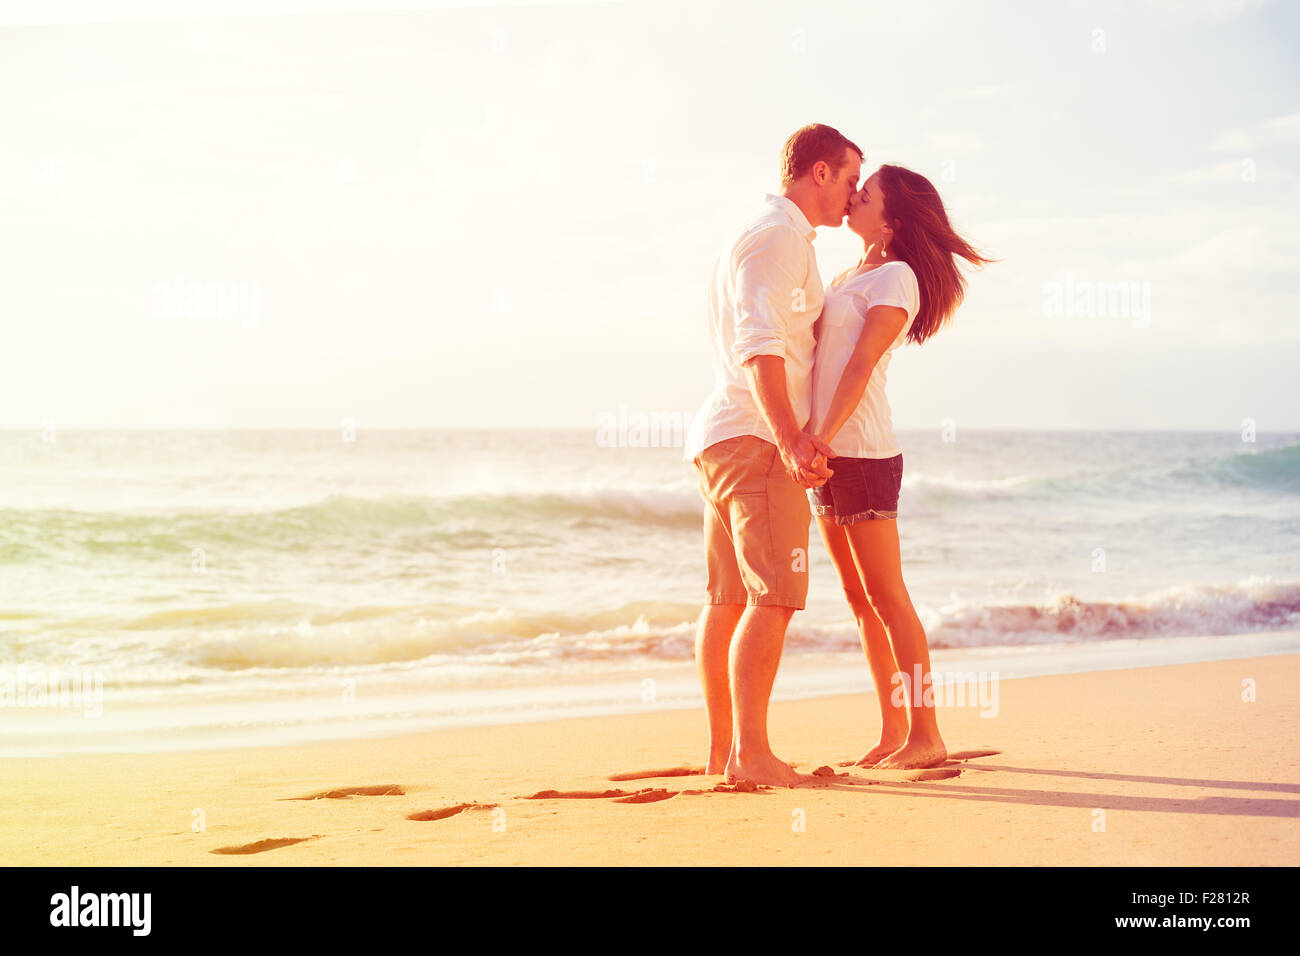 Happy Romantic Couple Kissing on the Beach at Sunset Stock Photo - Alamy